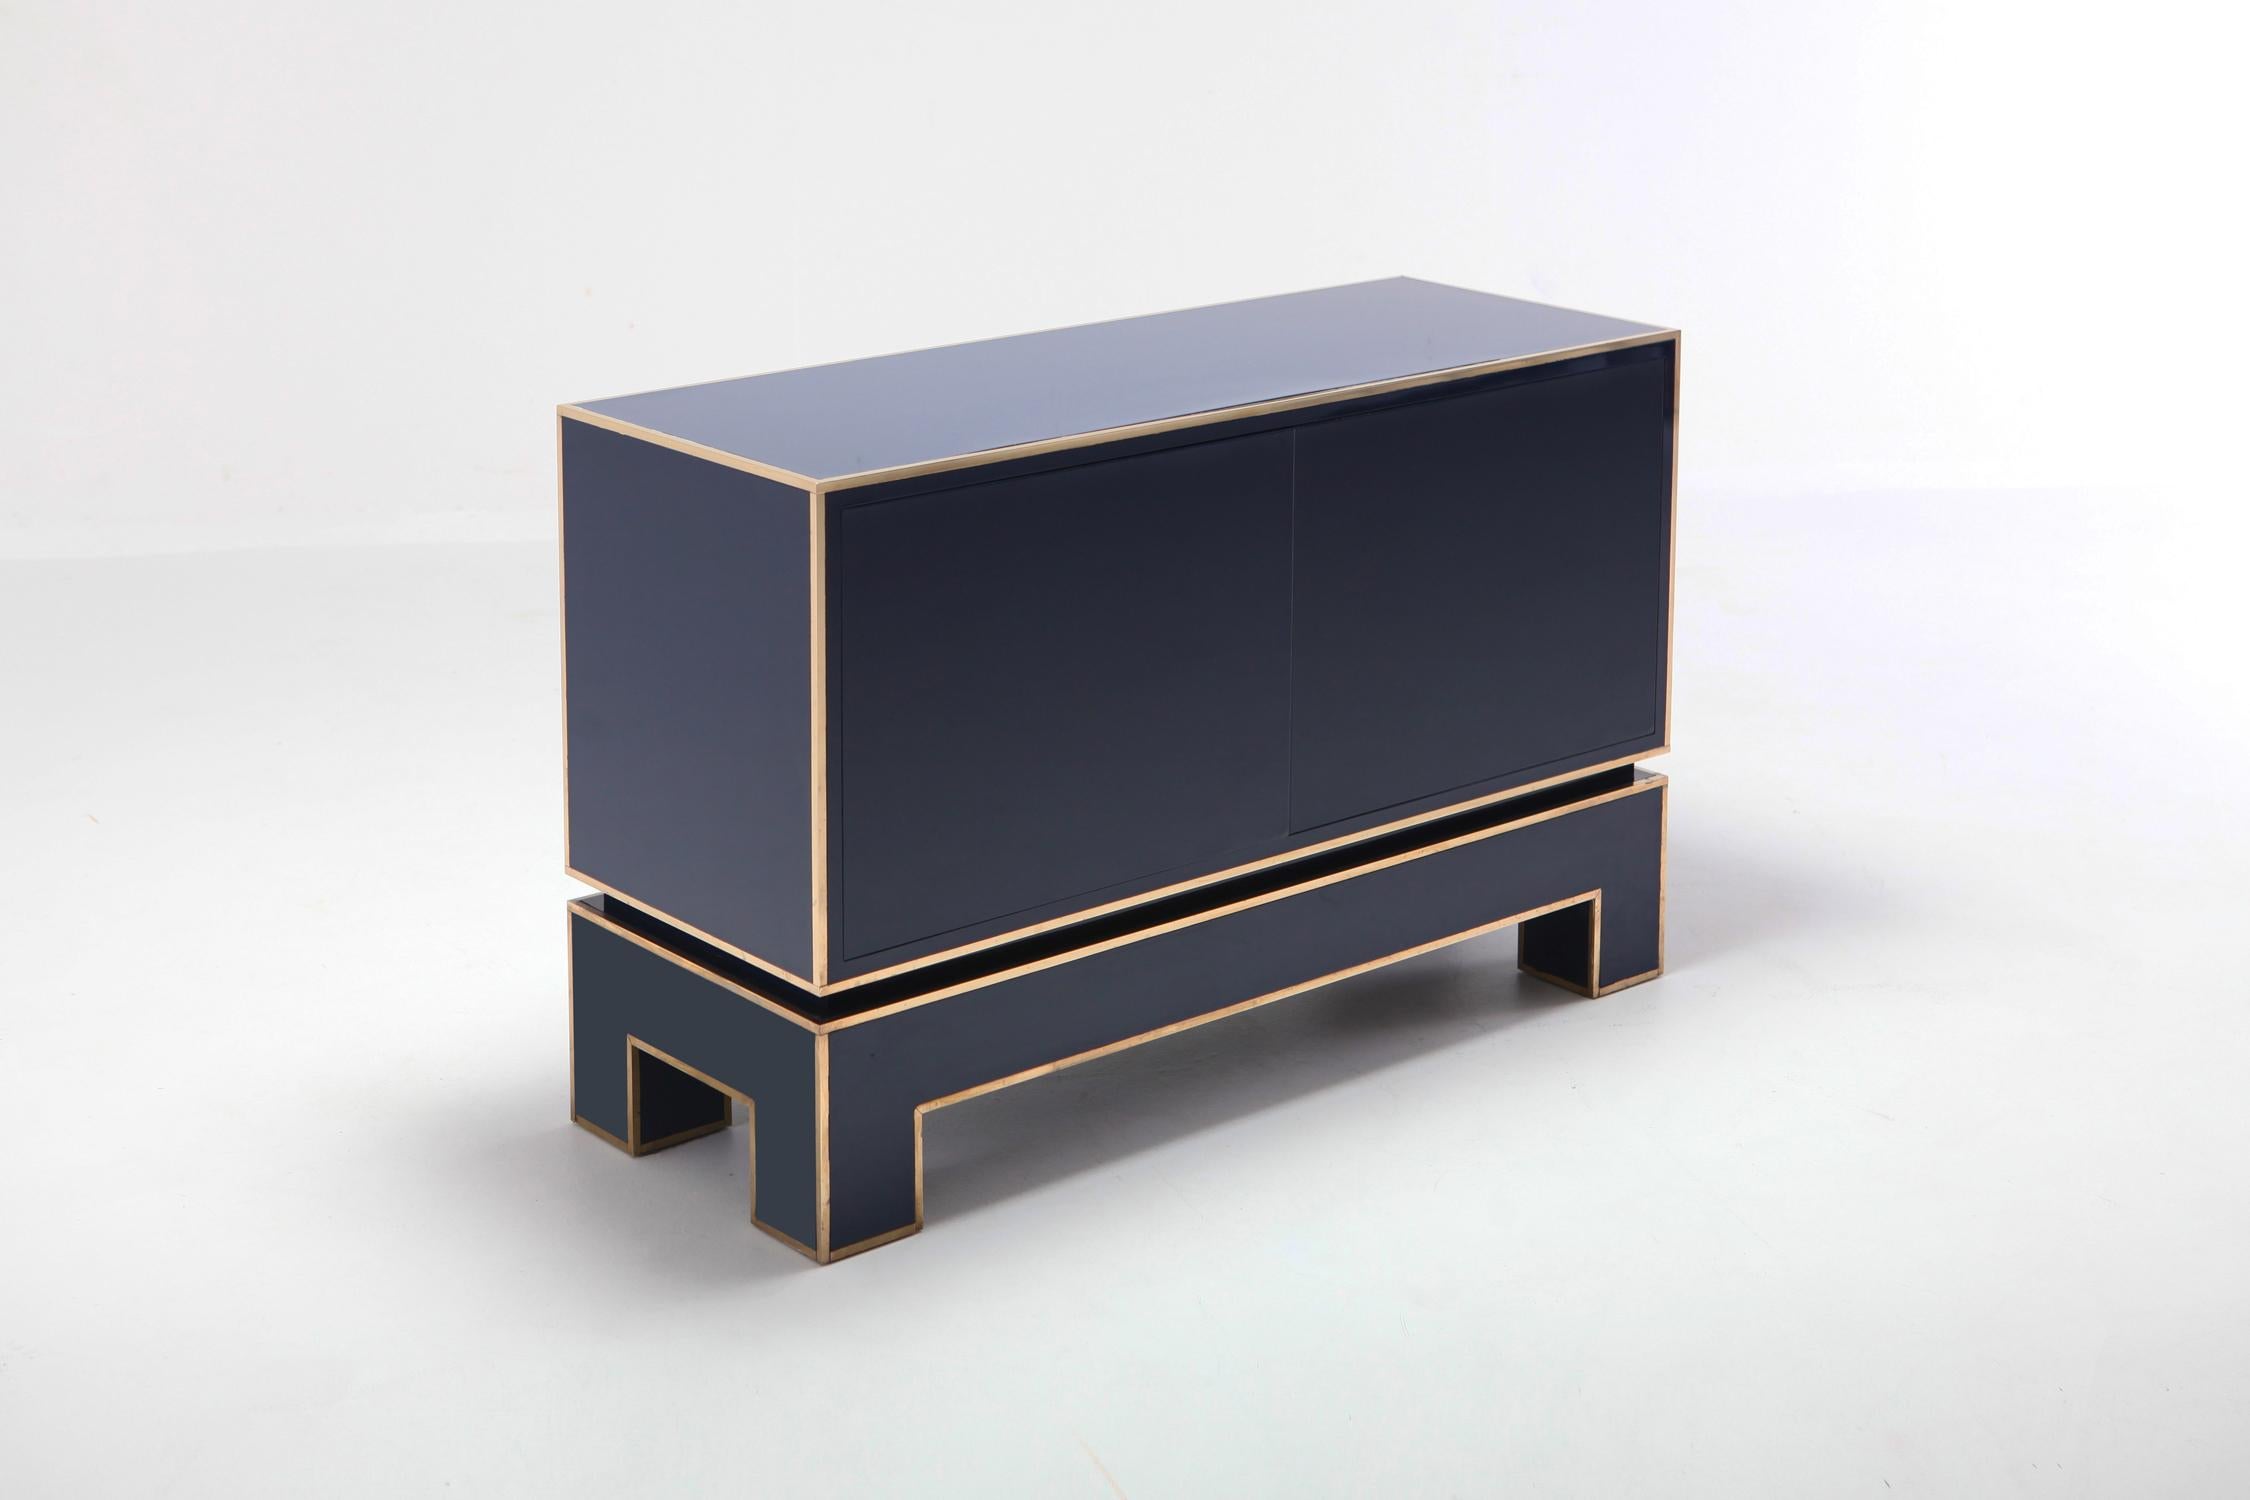 Blue and brass two-door cabinet in Hollywood Regency Italian glam style 
this high end cabinet is finished front to back
stunning piece by Alain Delon for Maison Jansen
would fit well in an eclectic Willy Rizzo, Romeo Rega inspired interior.

 